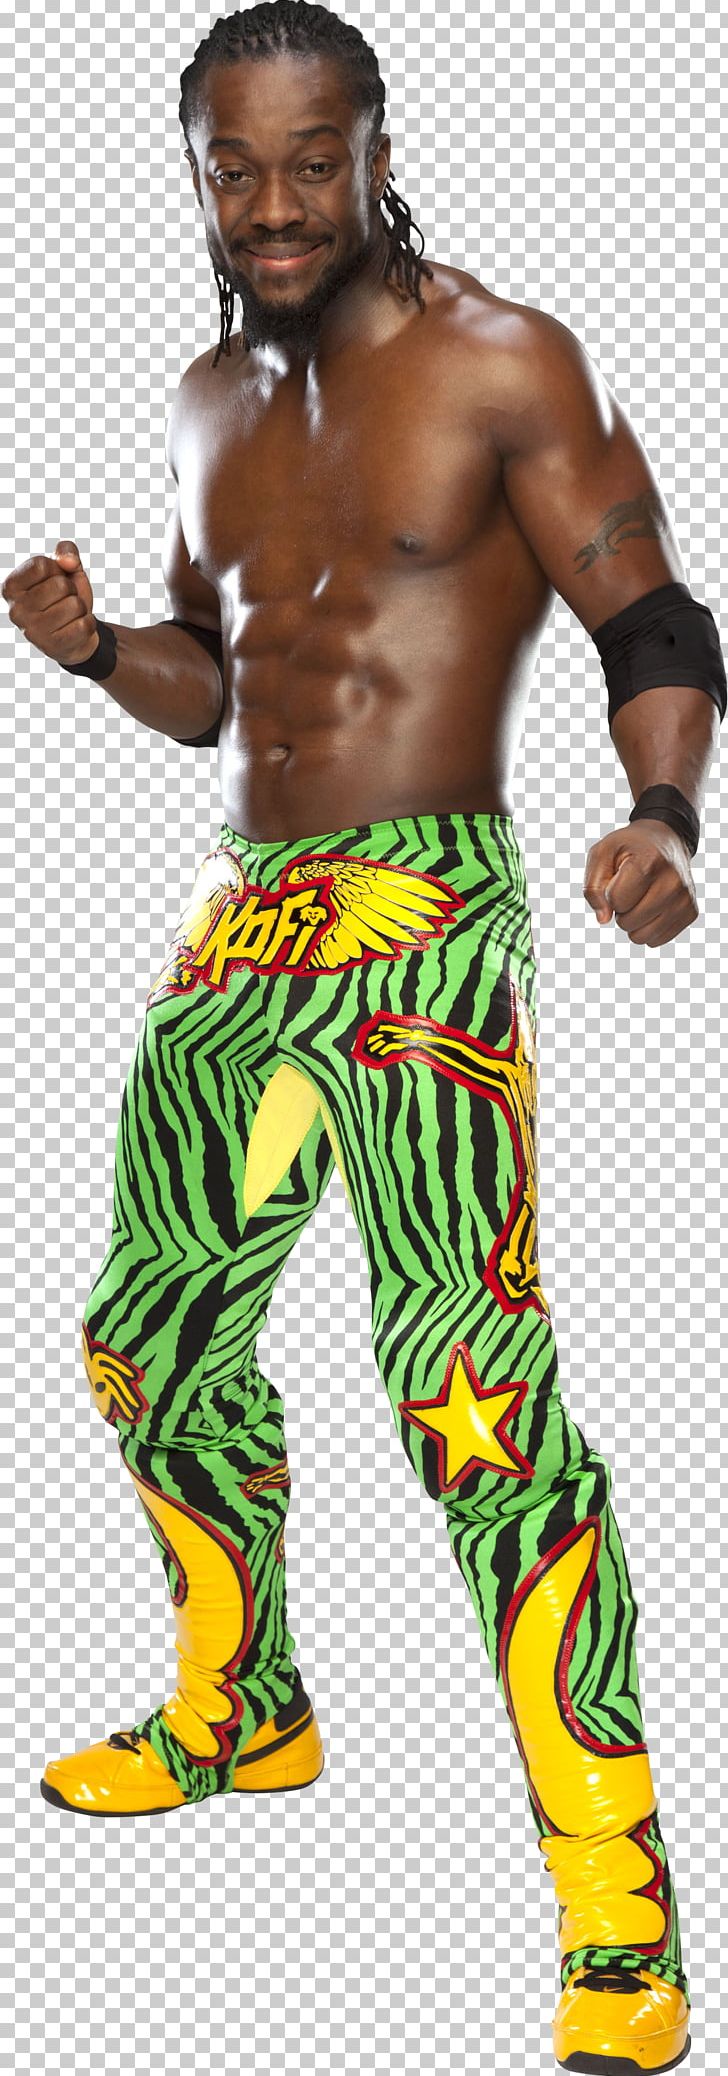 Kofi Kingston WWE Superstars Royal Rumble Professional Wrestler Actor PNG, Clipart, Abdomen, Actor, Arm, Barechestedness, Chest Free PNG Download